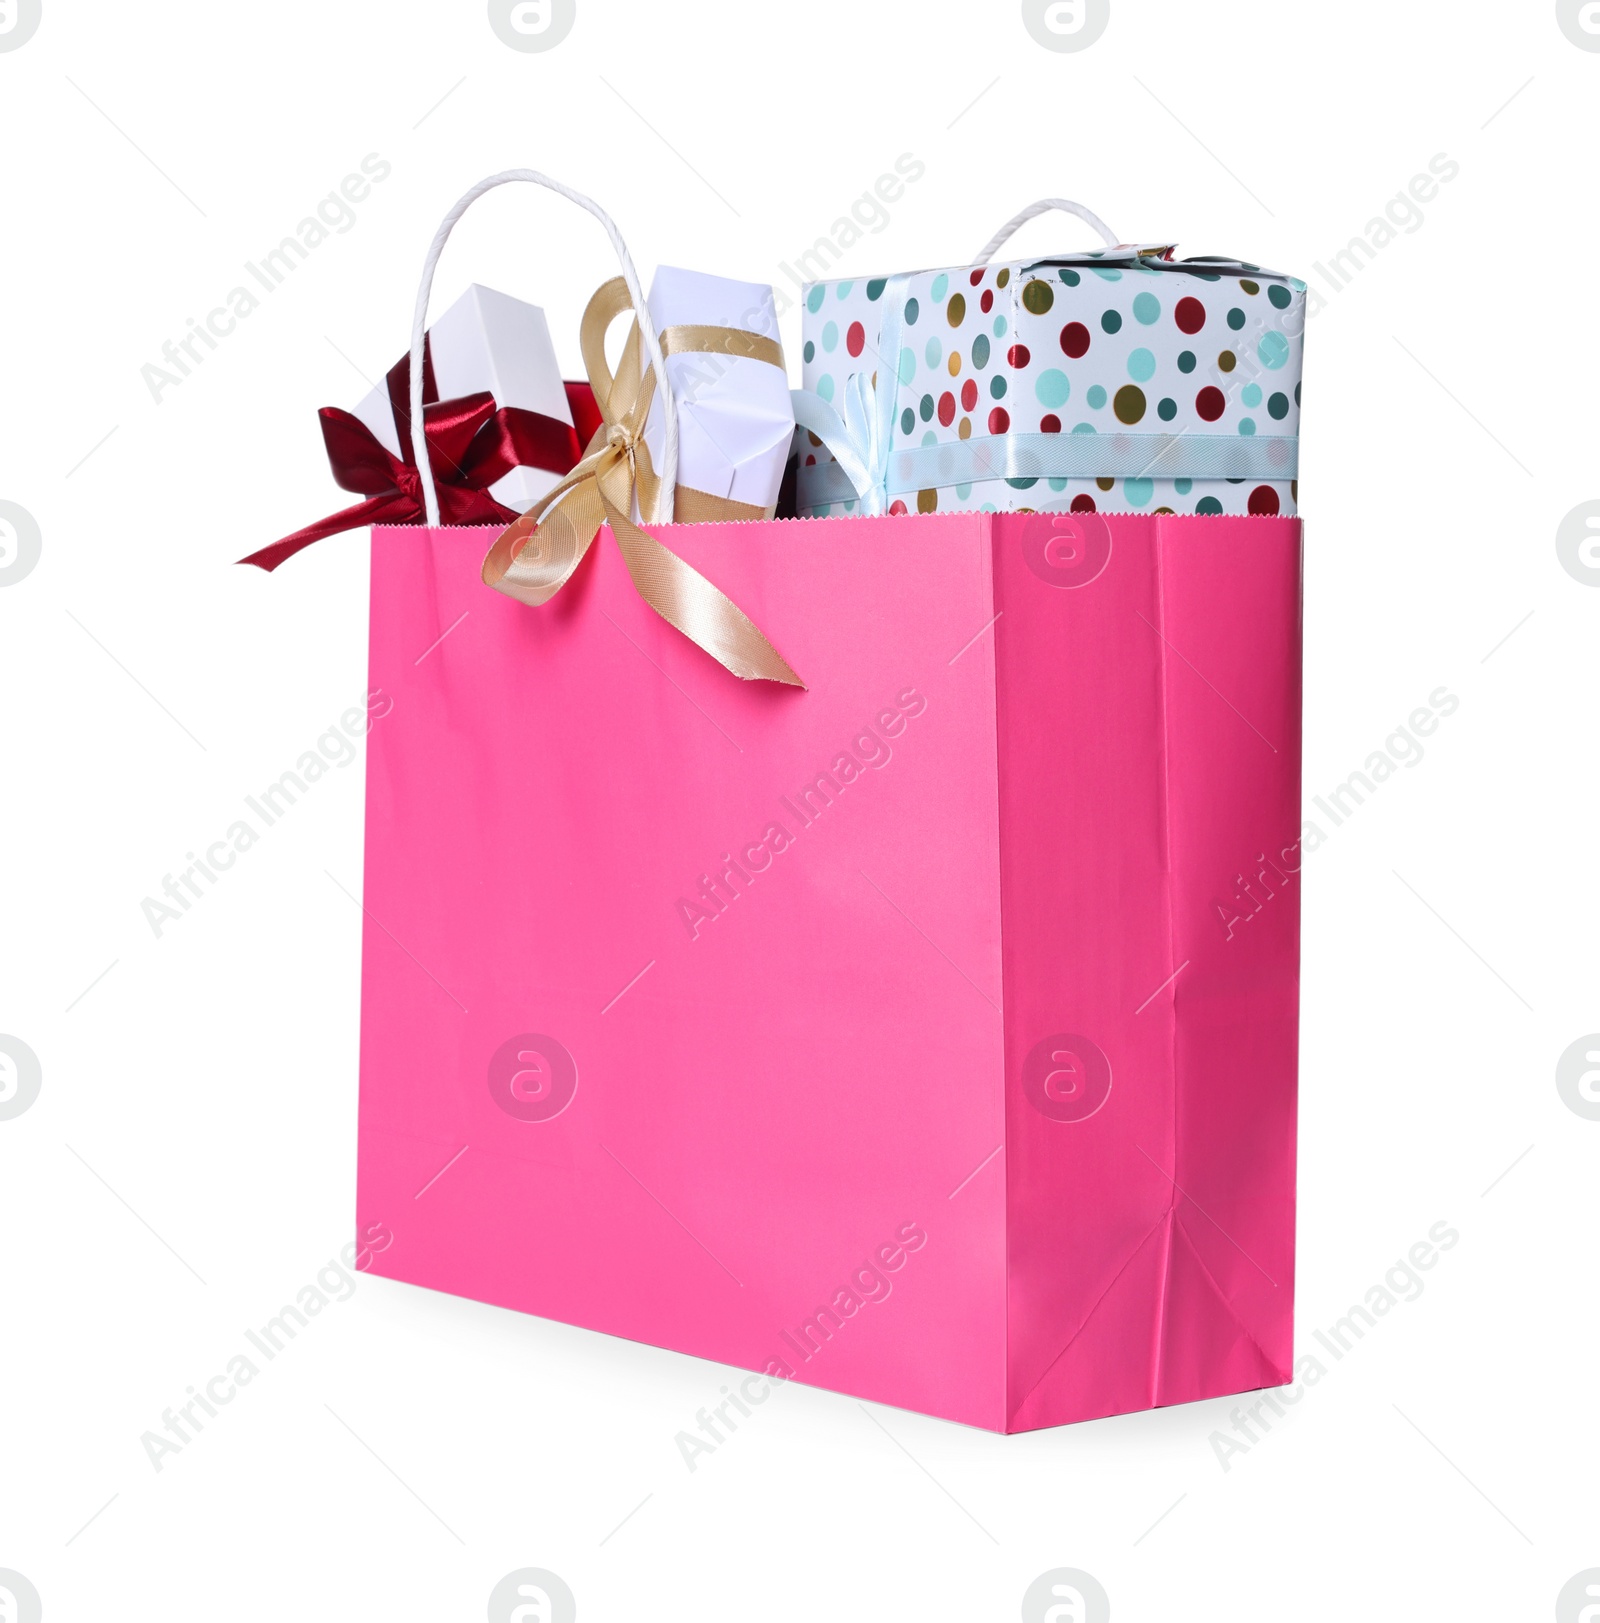 Photo of Pink paper shopping bag full of gift boxes on white background